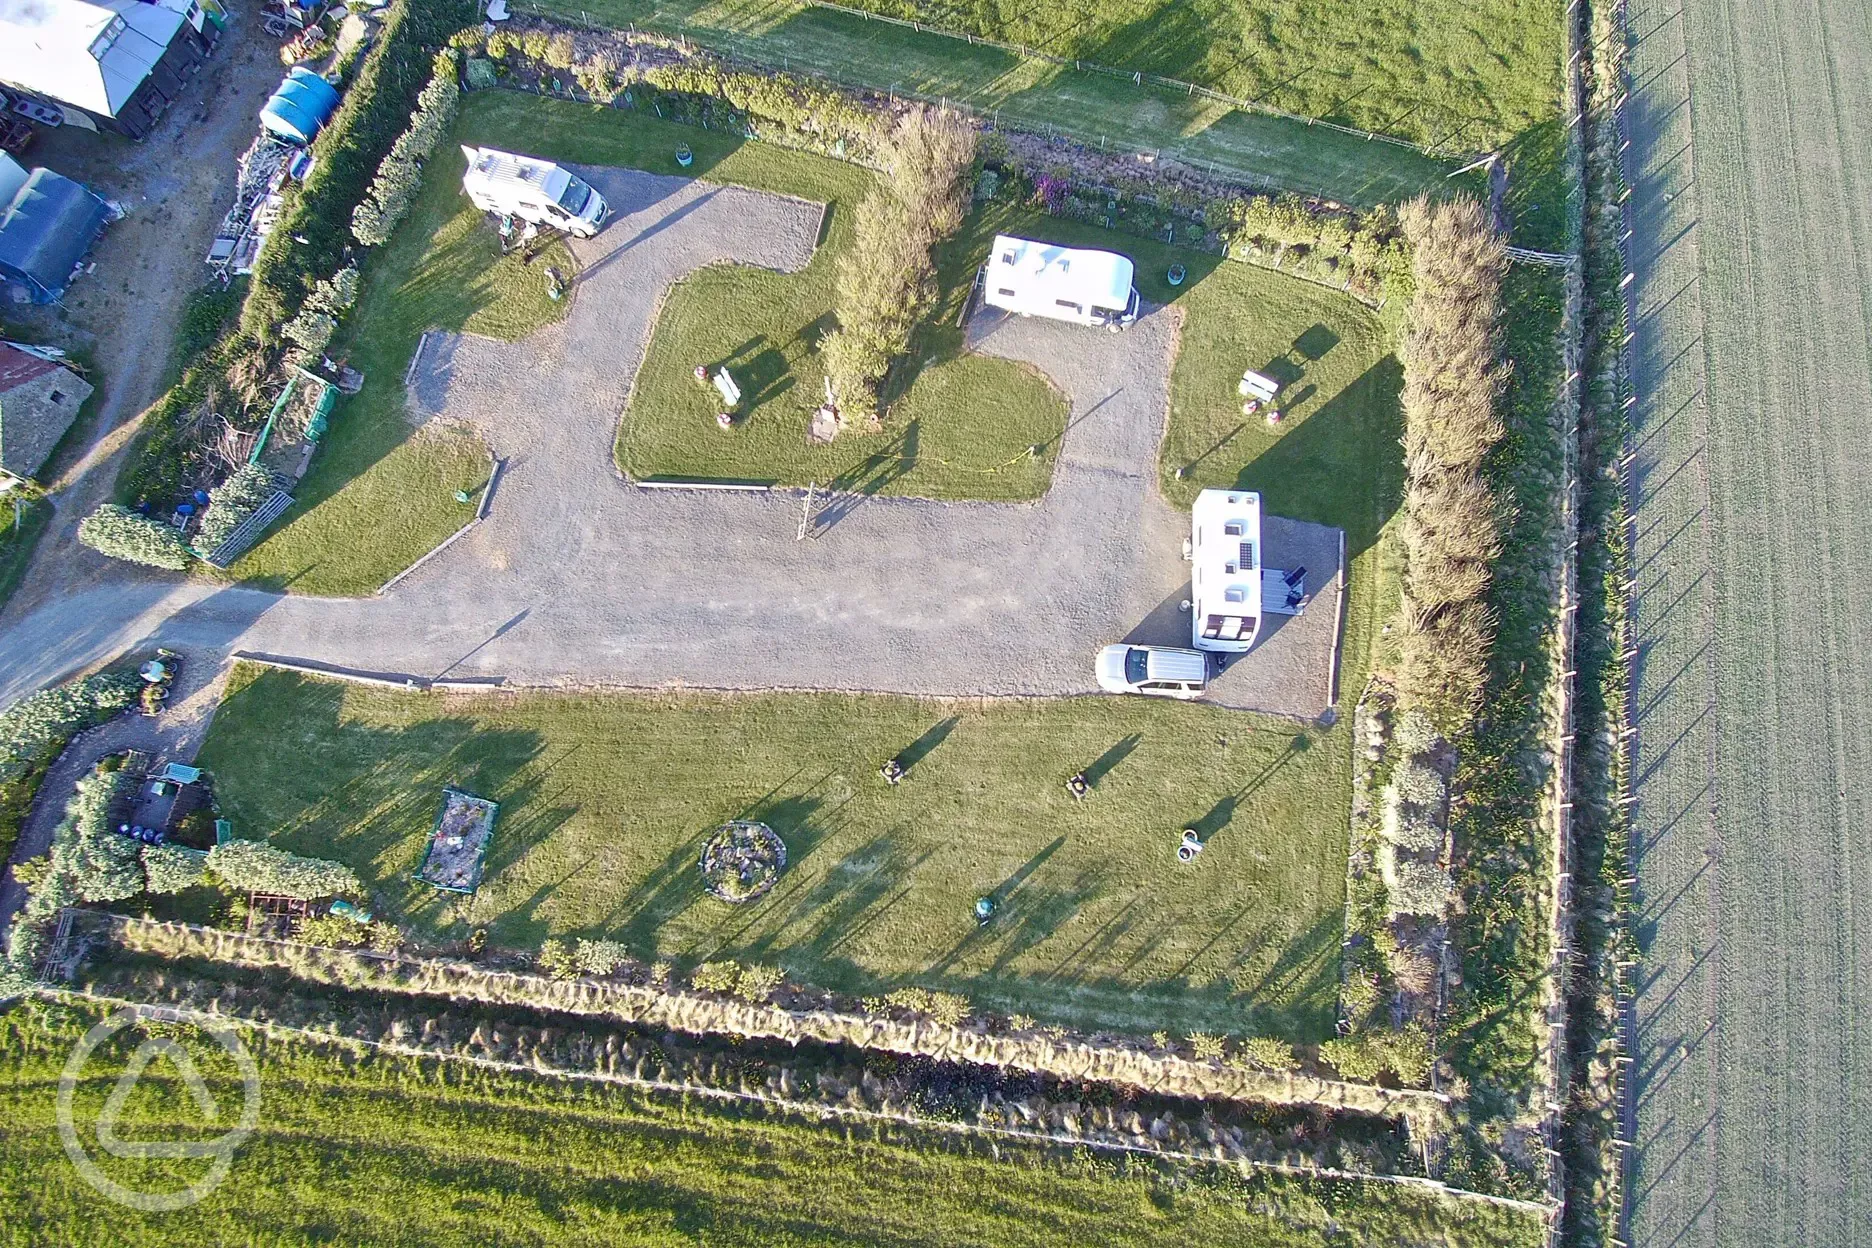 Drone view of site